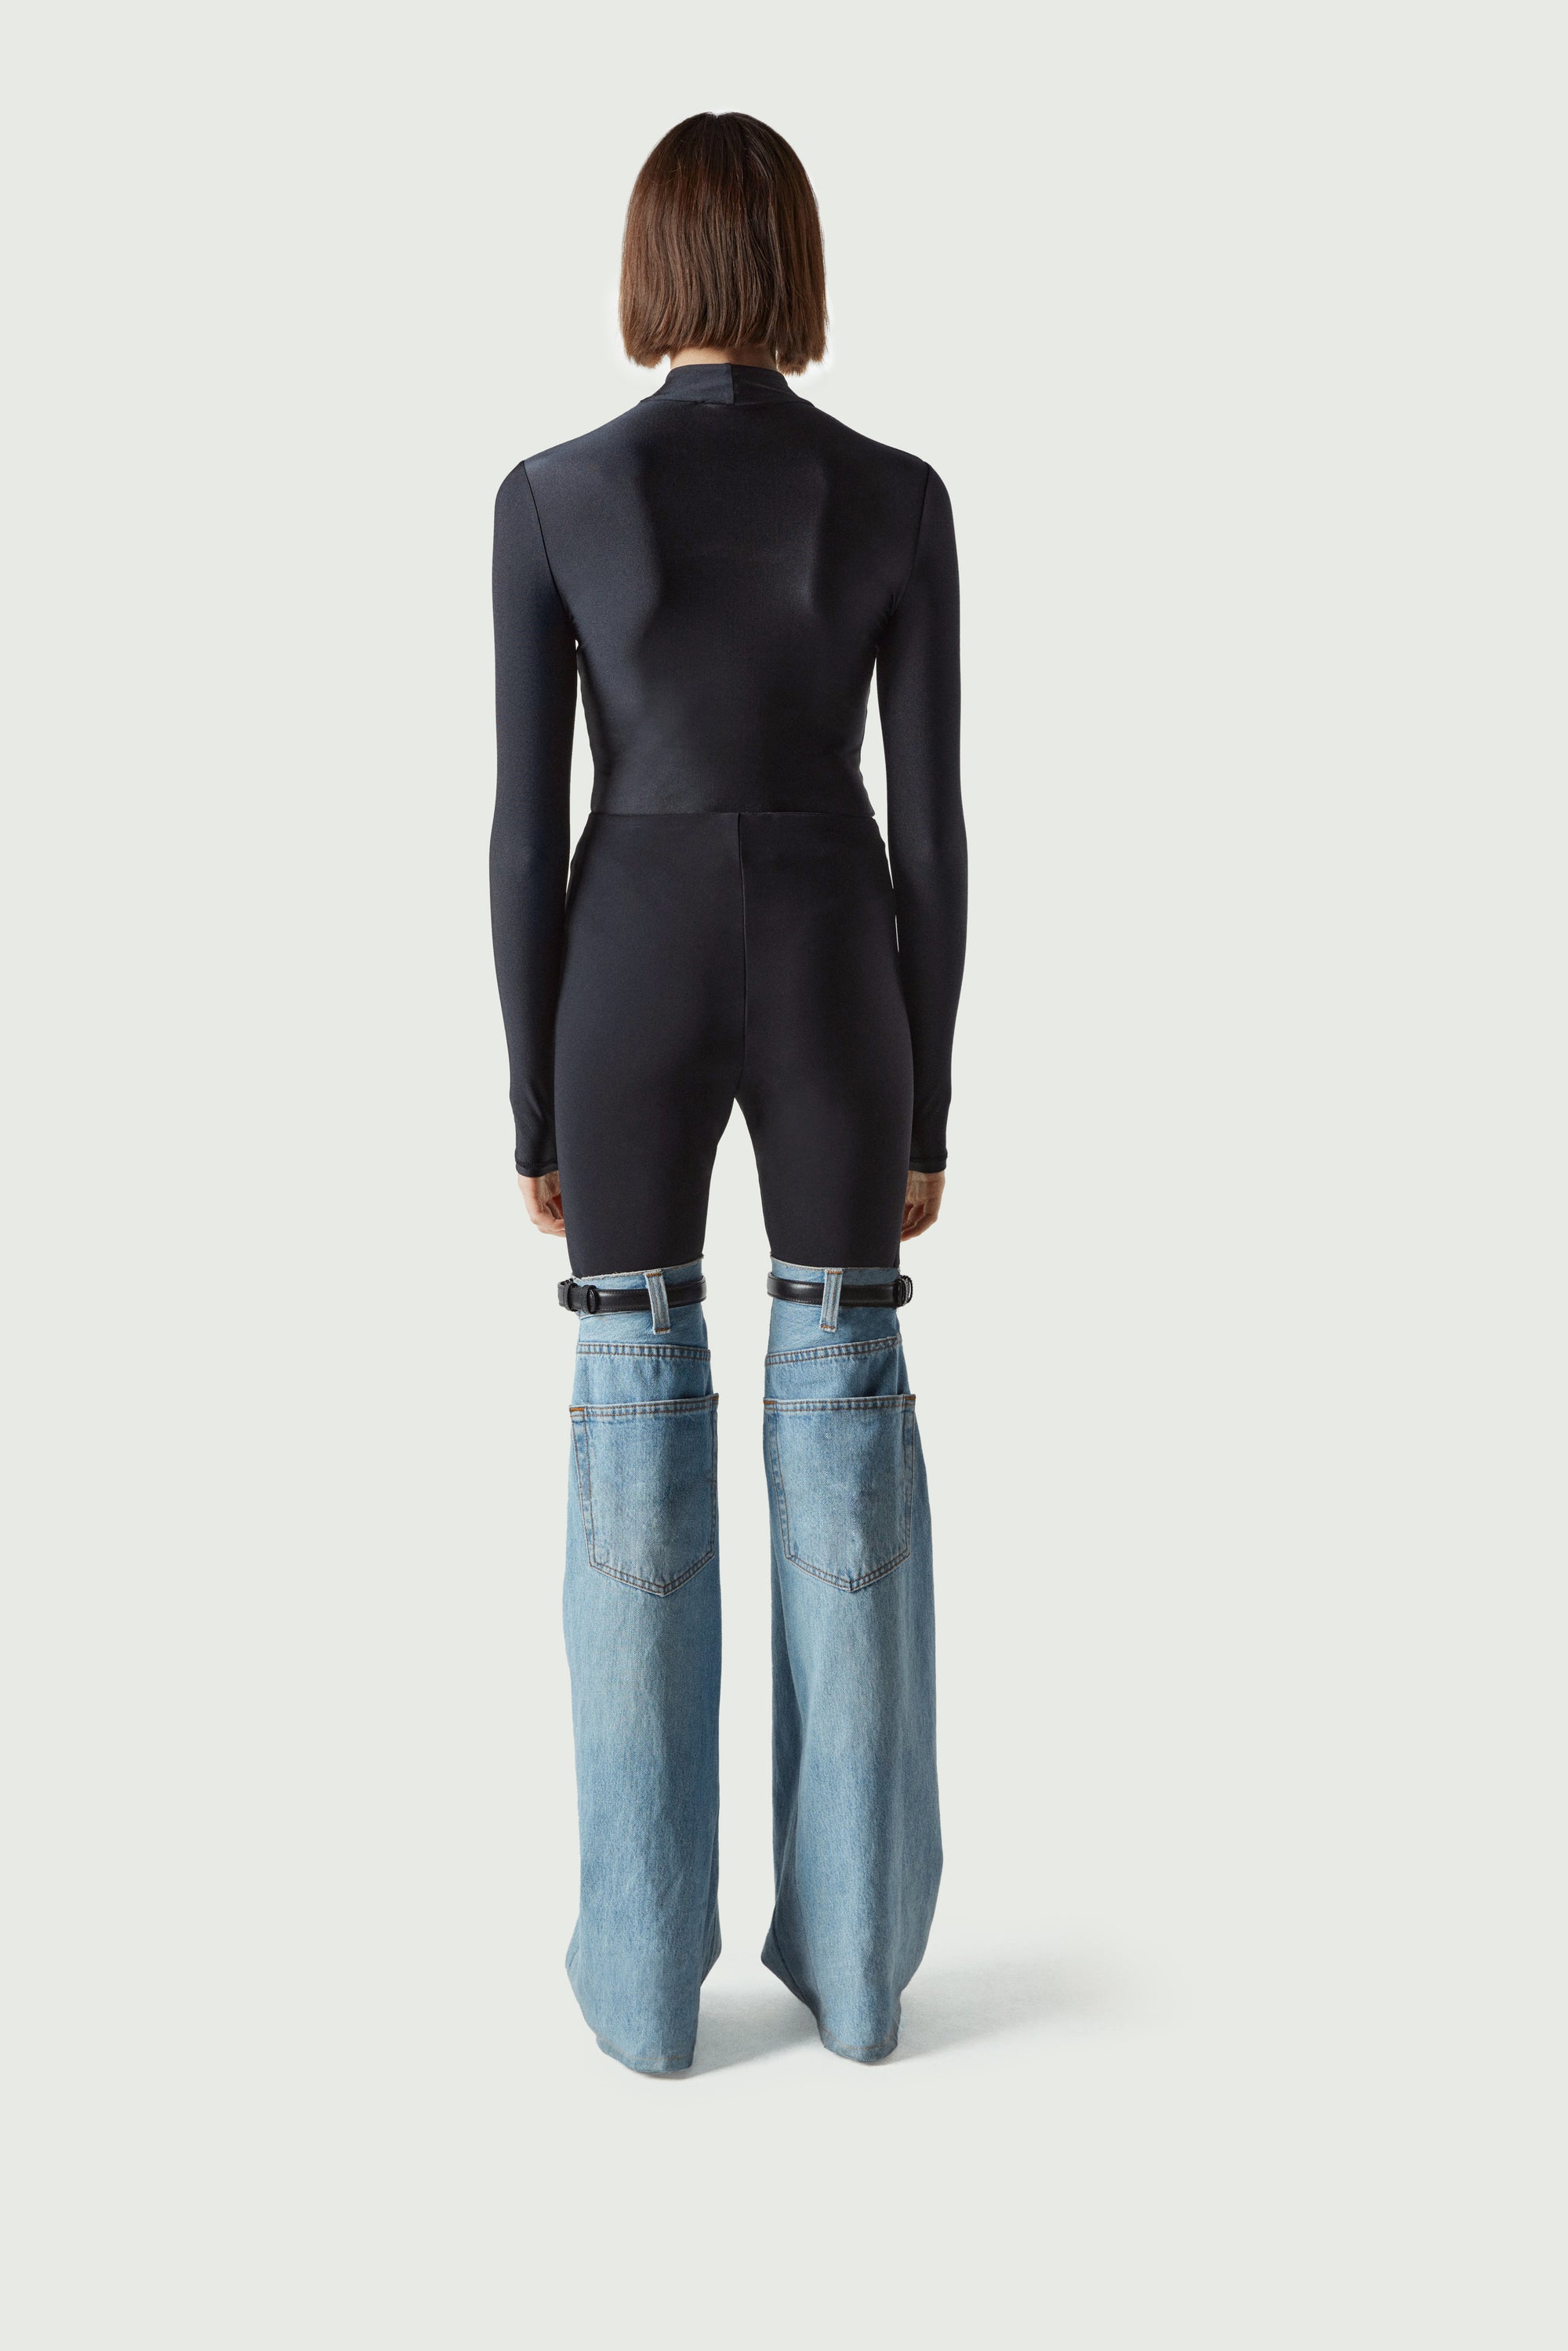 Flared Leather Trousers with Inserts COPERNI